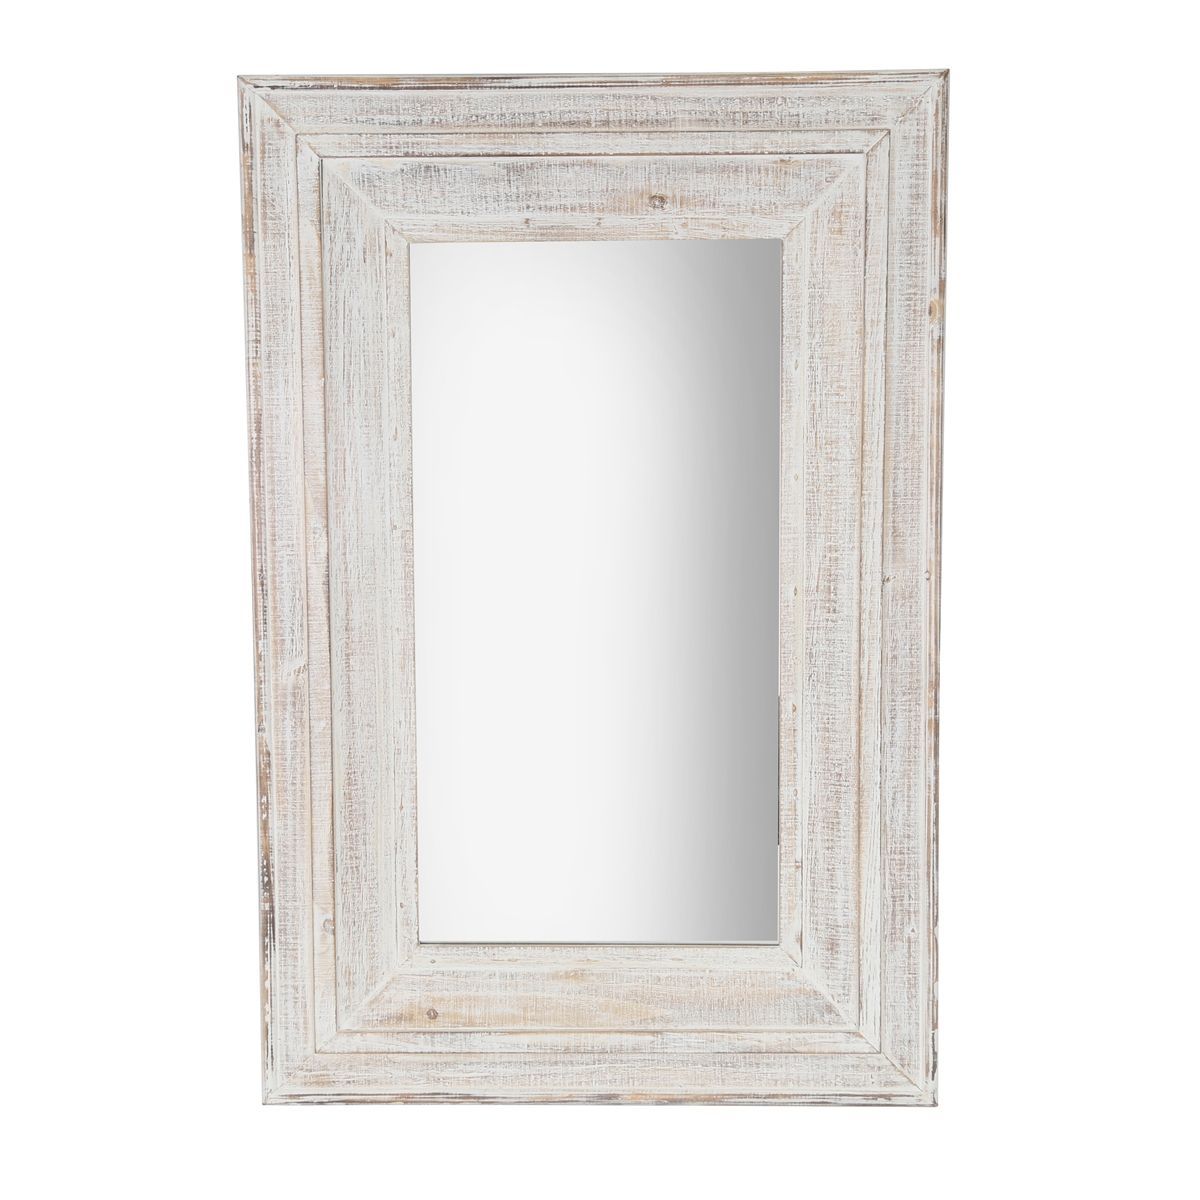 Antique White Wood Frame Wall Mirror | #sagebrookhome Www (View 5 of 15)